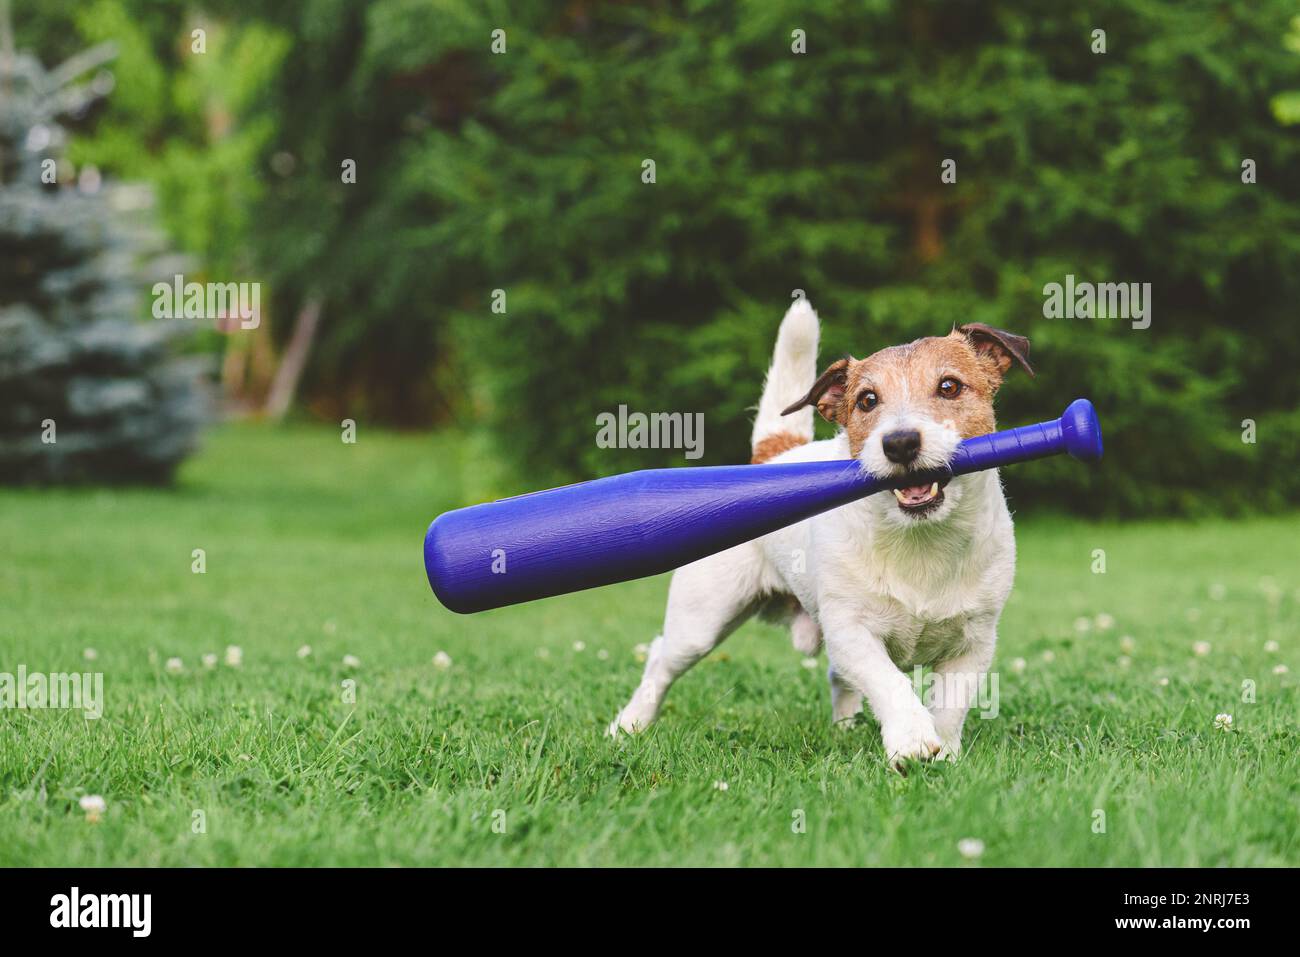 Dog holding in mouth kid's baseball bat trying to make swing. Funny baseball player on grass Stock Photo